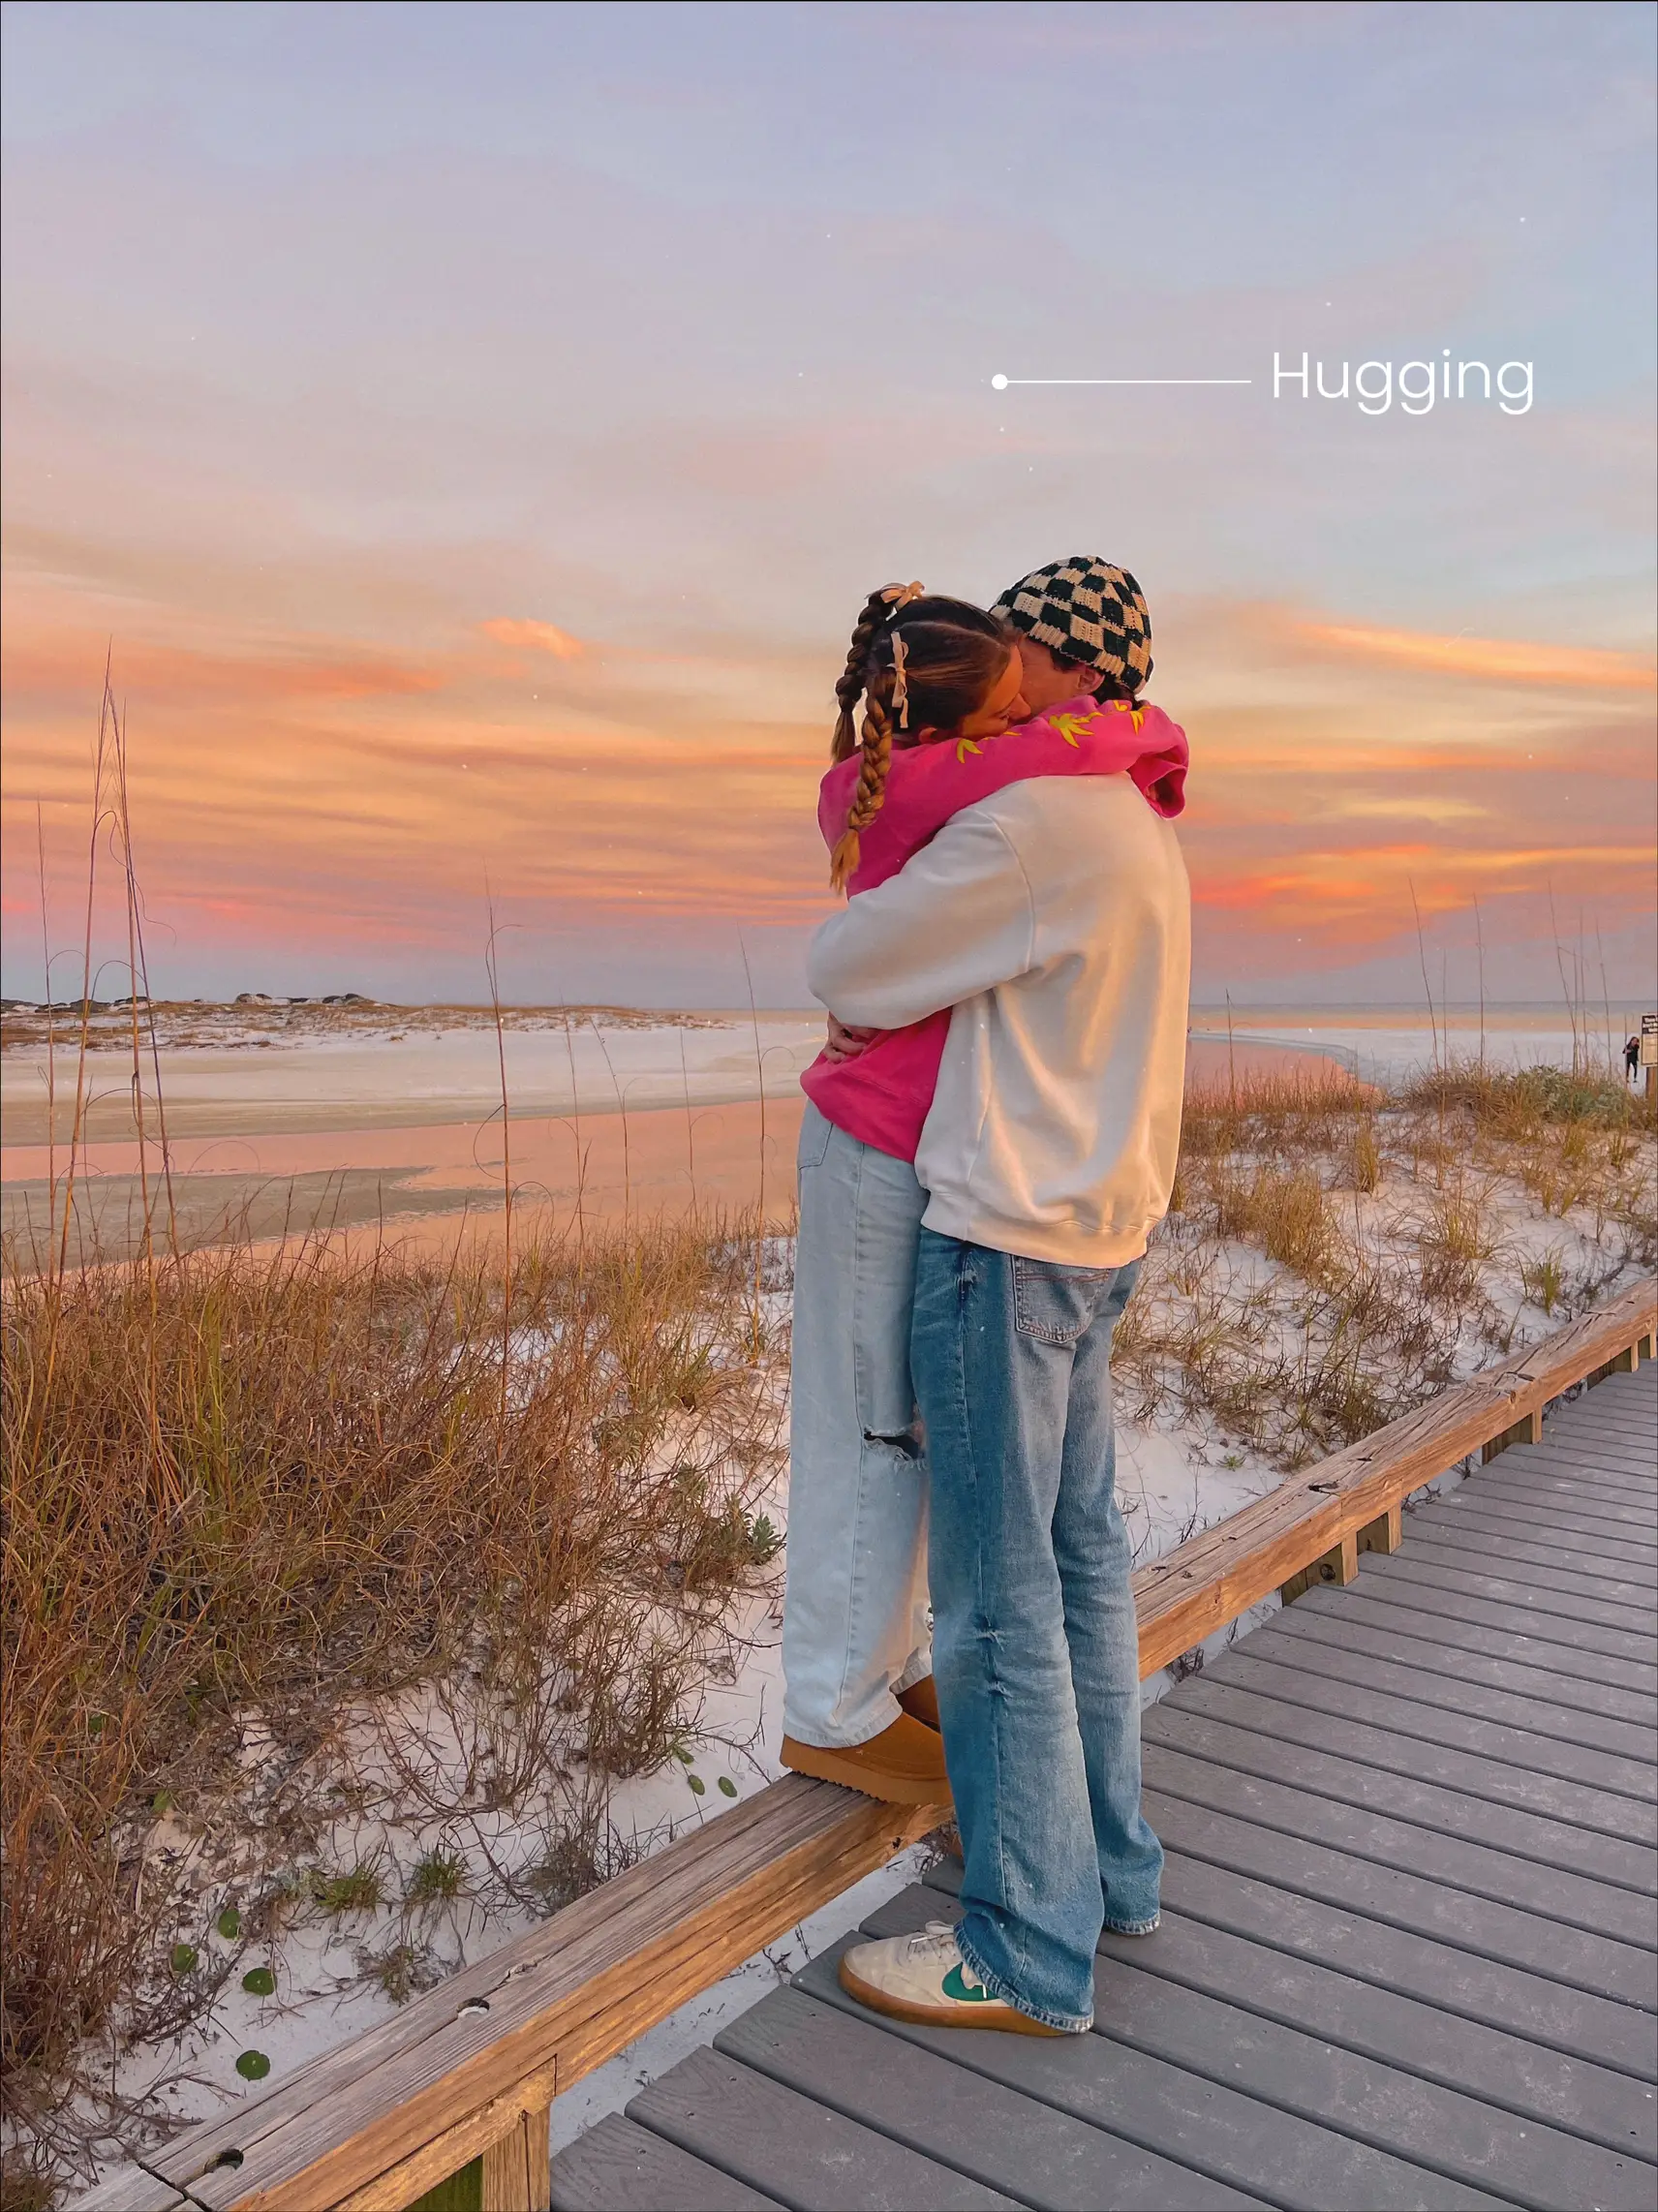  Three people are hugging each other on a boardwalk.